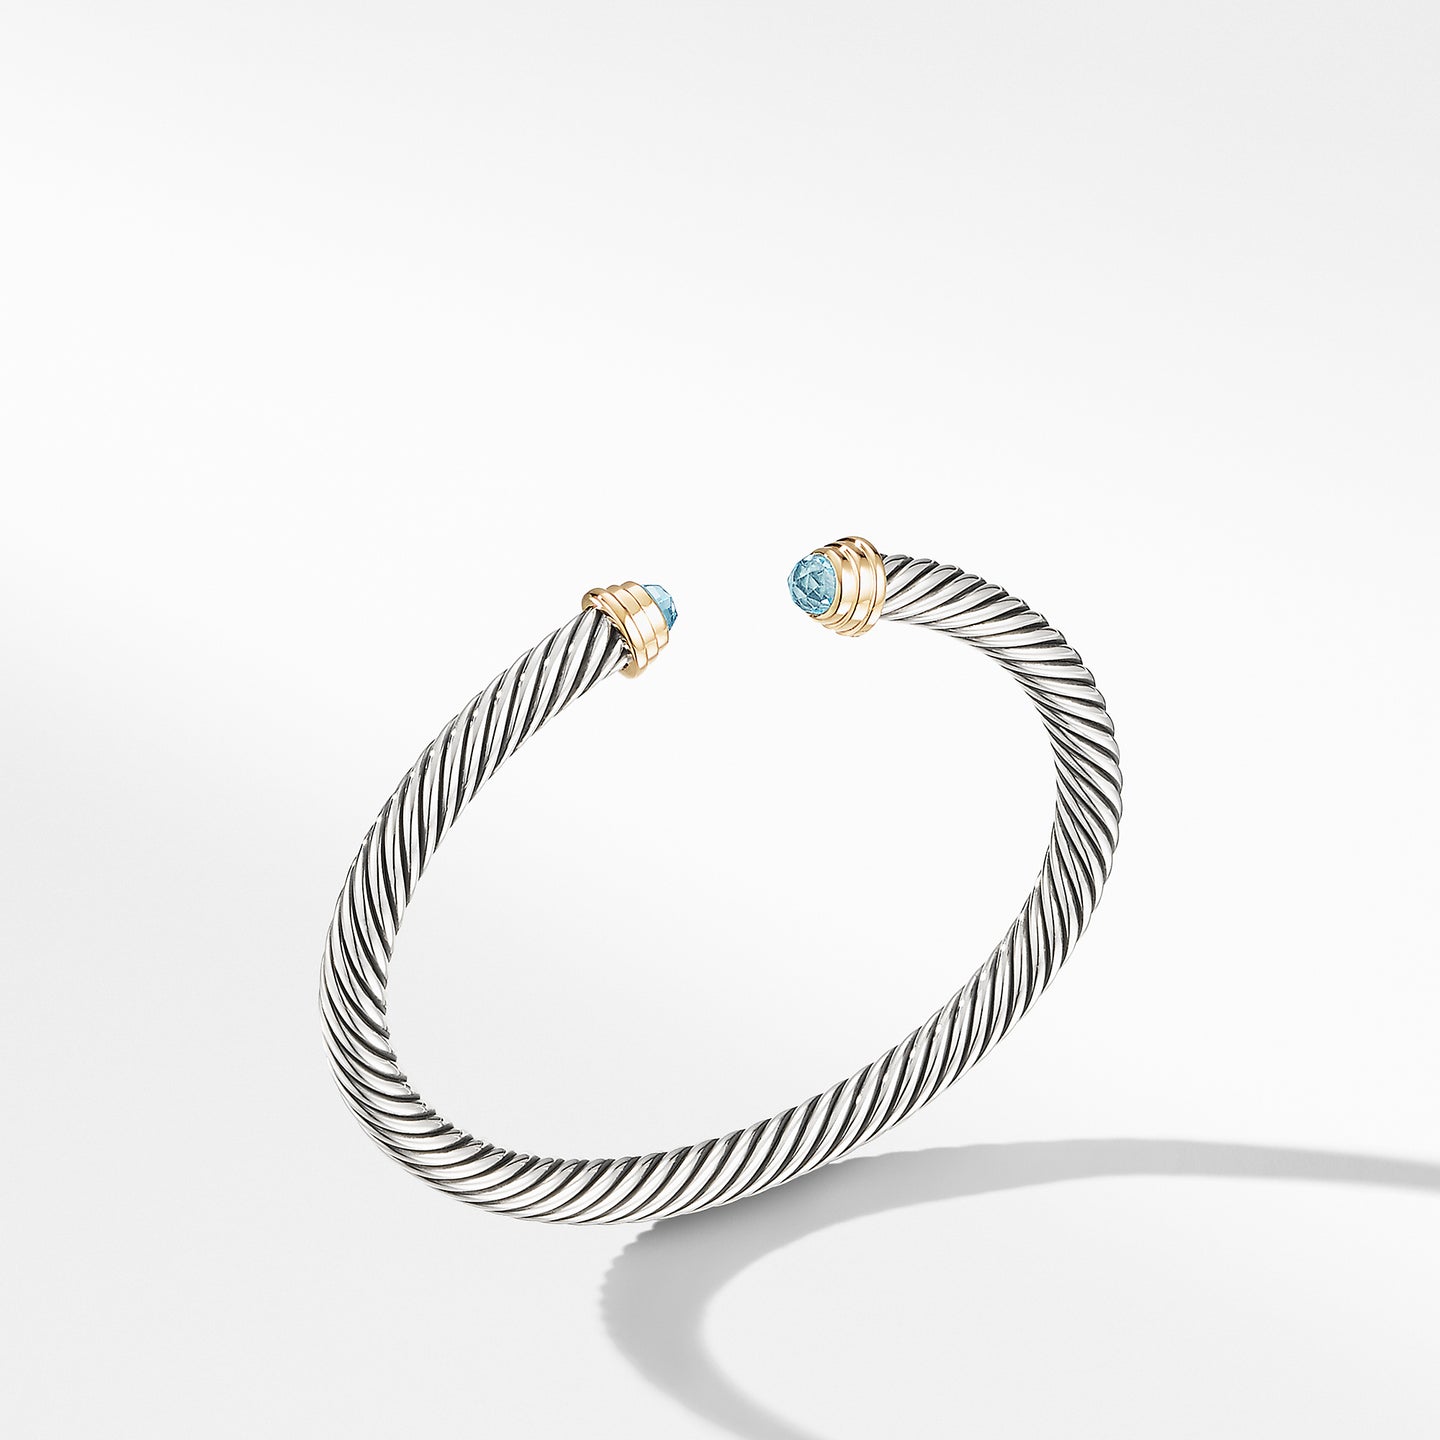 Cable Kids® Birthstone Bracelet with Aquamarine and 14K Gold, 4mm